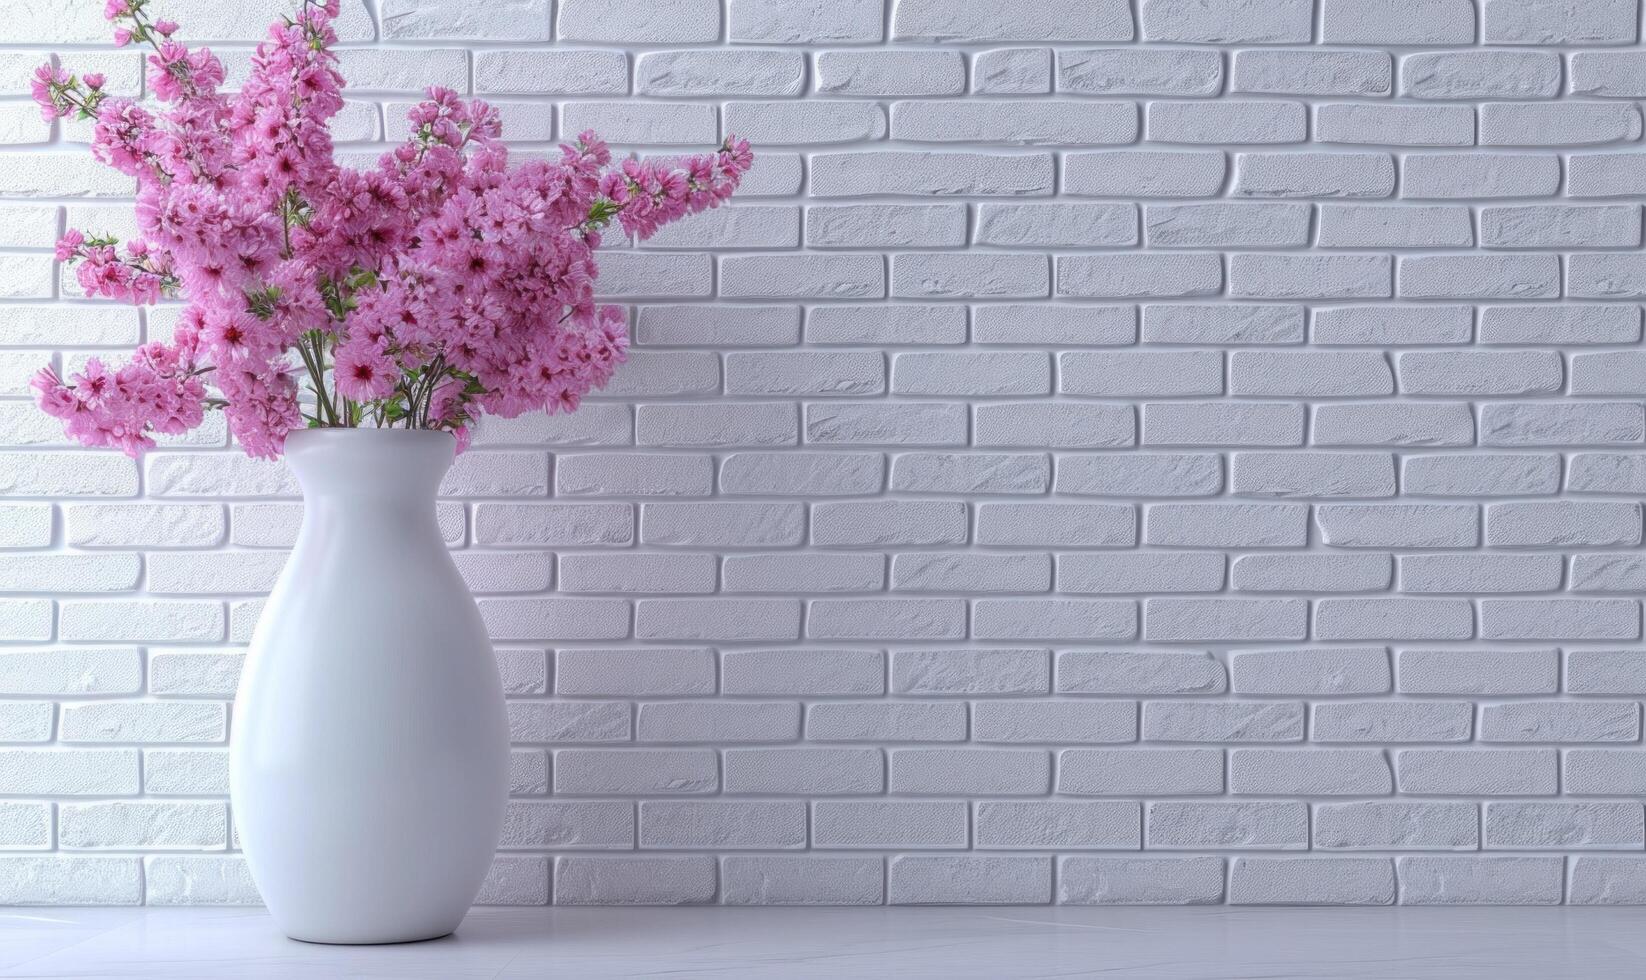 AI generated a white vase filled with flowers on a wood table against a brick wall photo